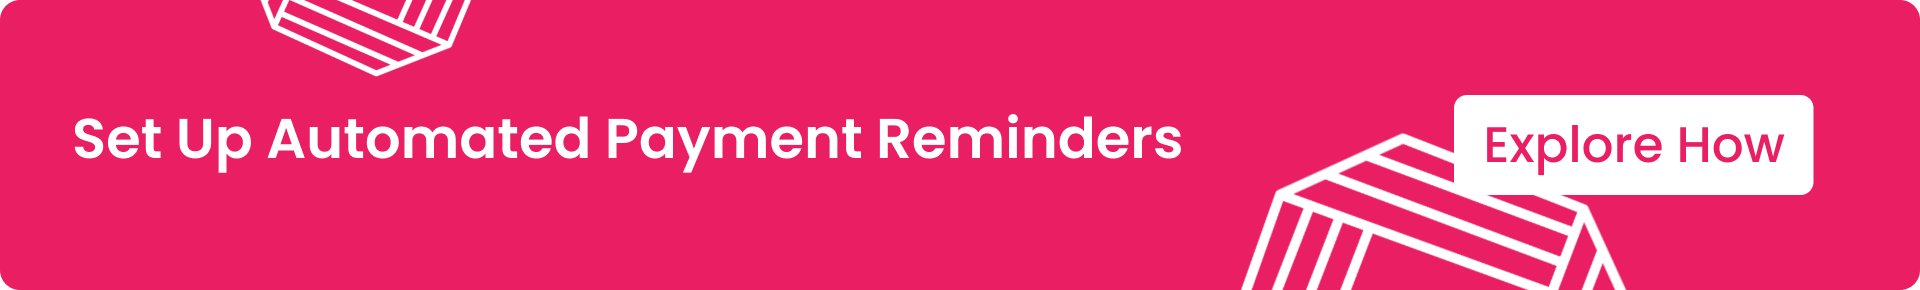 payment reminder automation